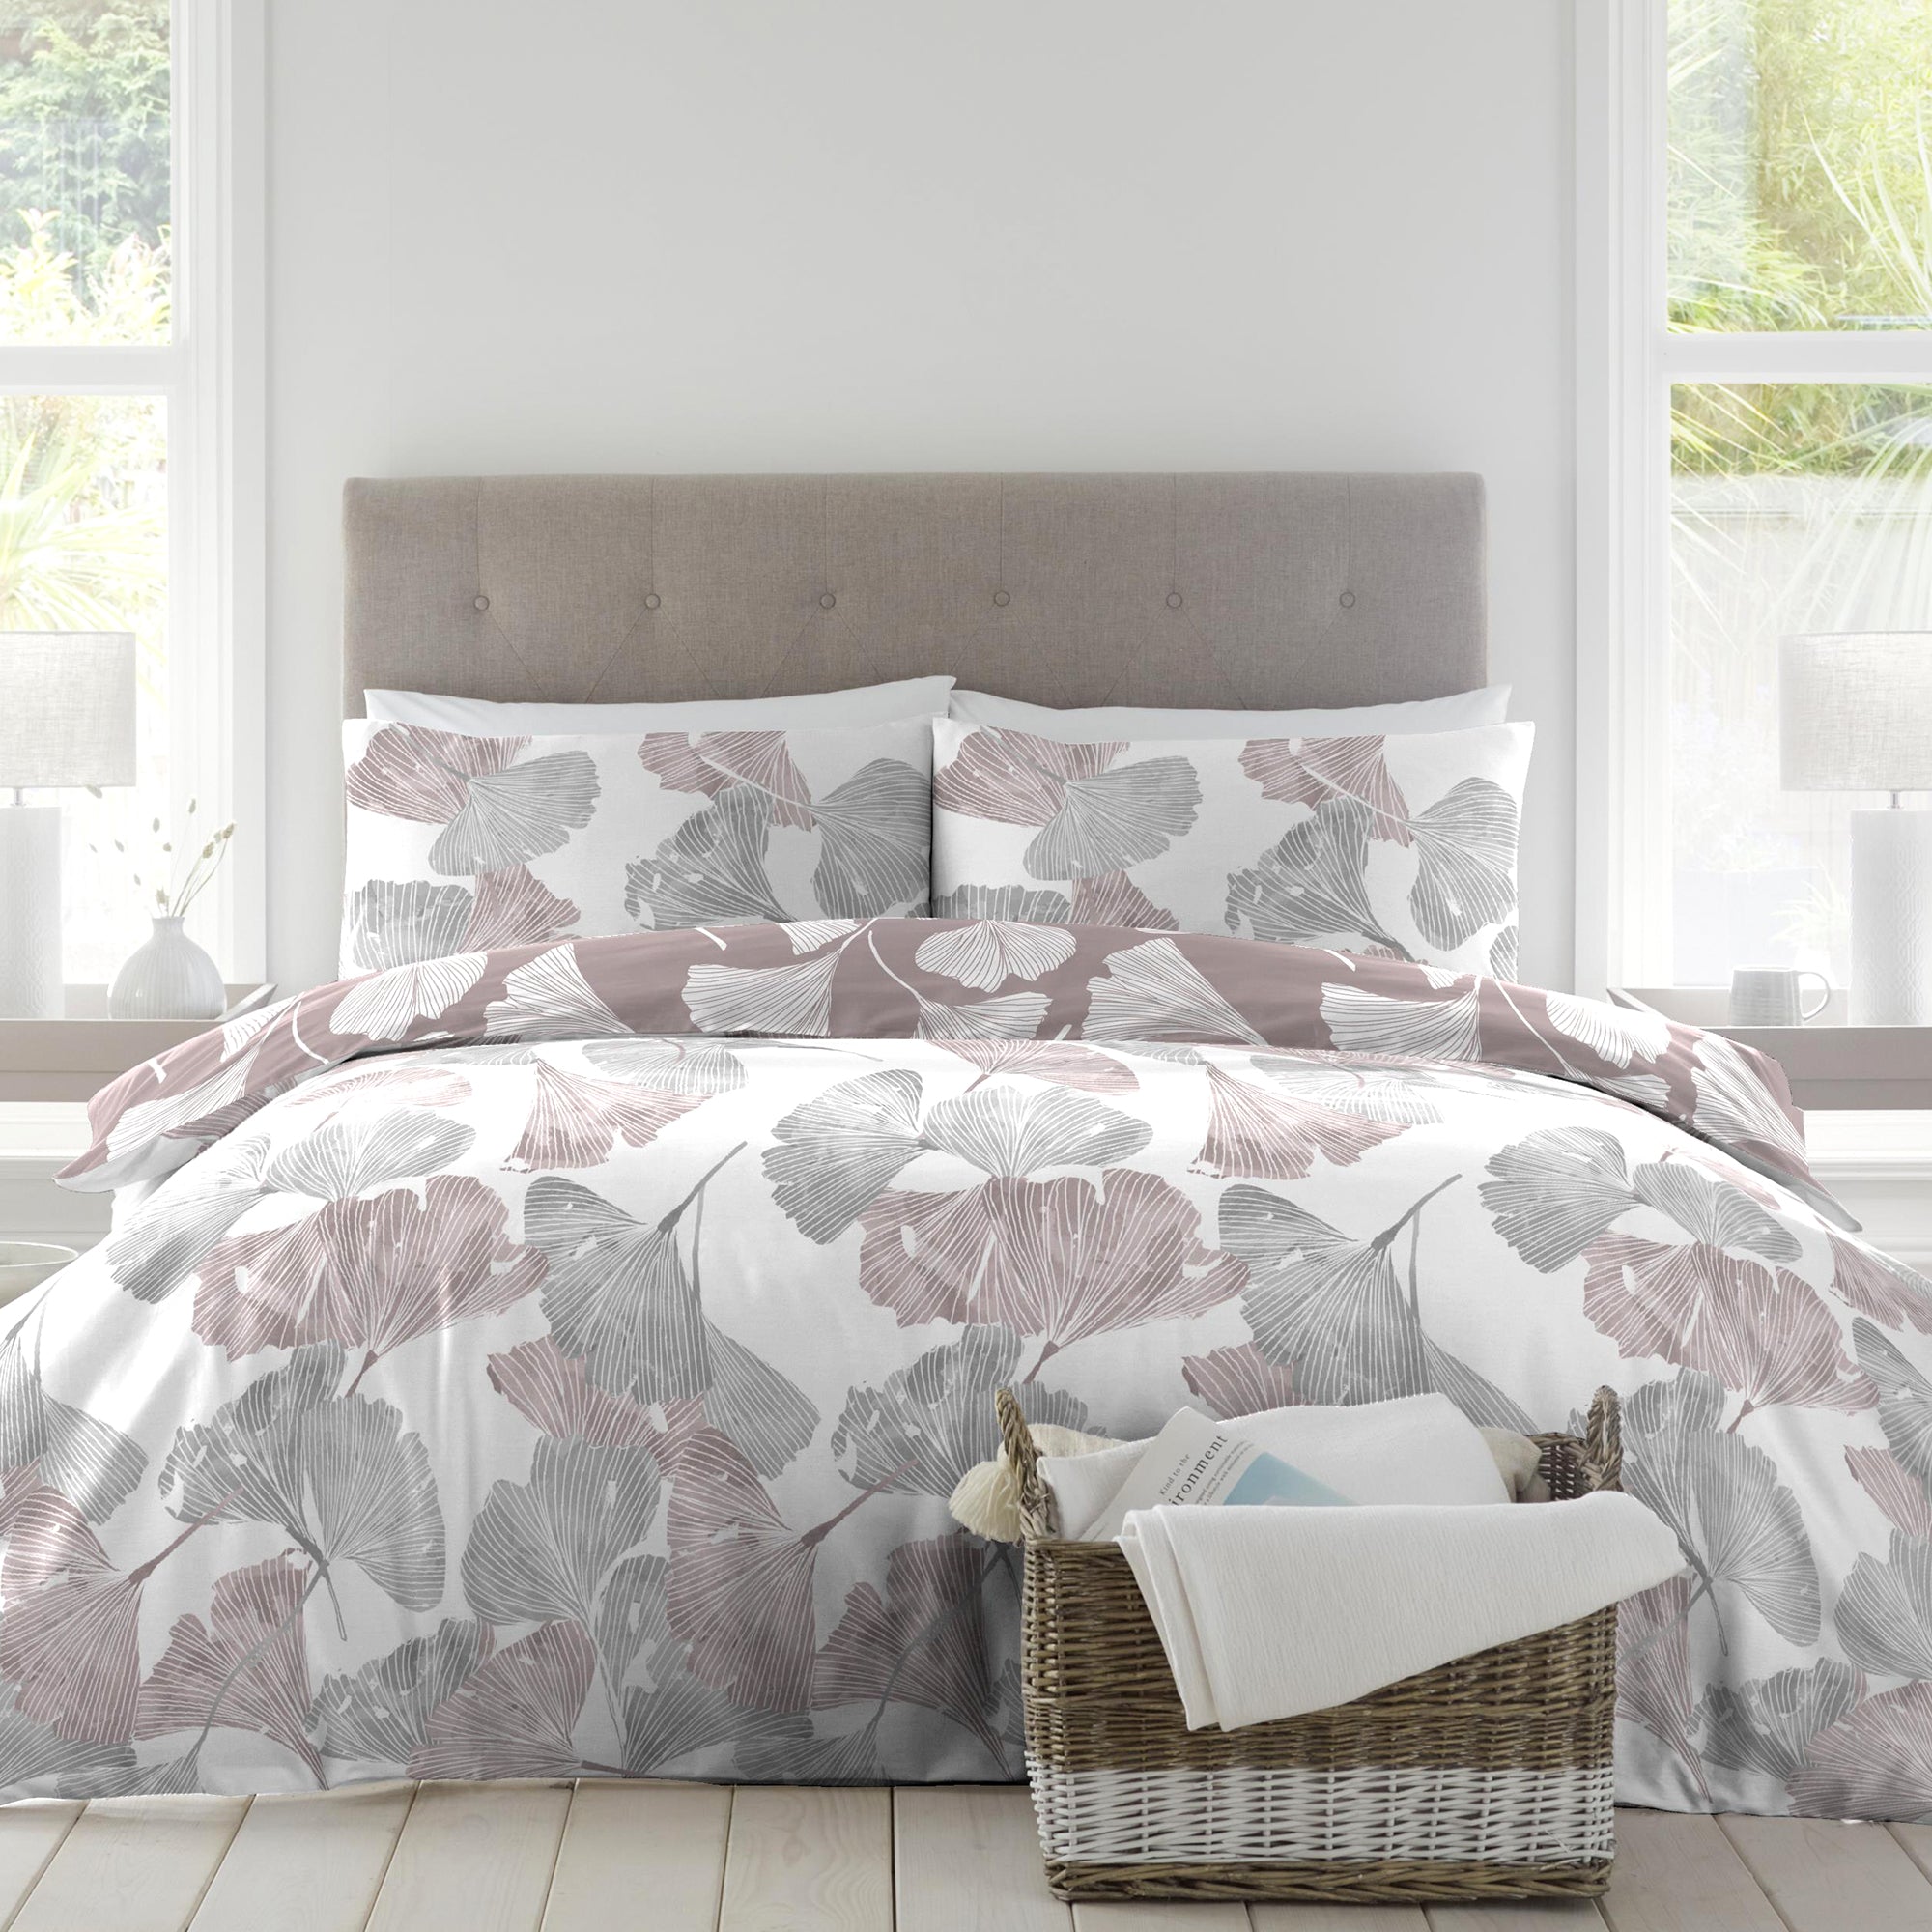 Ginkgo - Eco-Friendly Duvet Cover Set in Amethyst by Drift Home